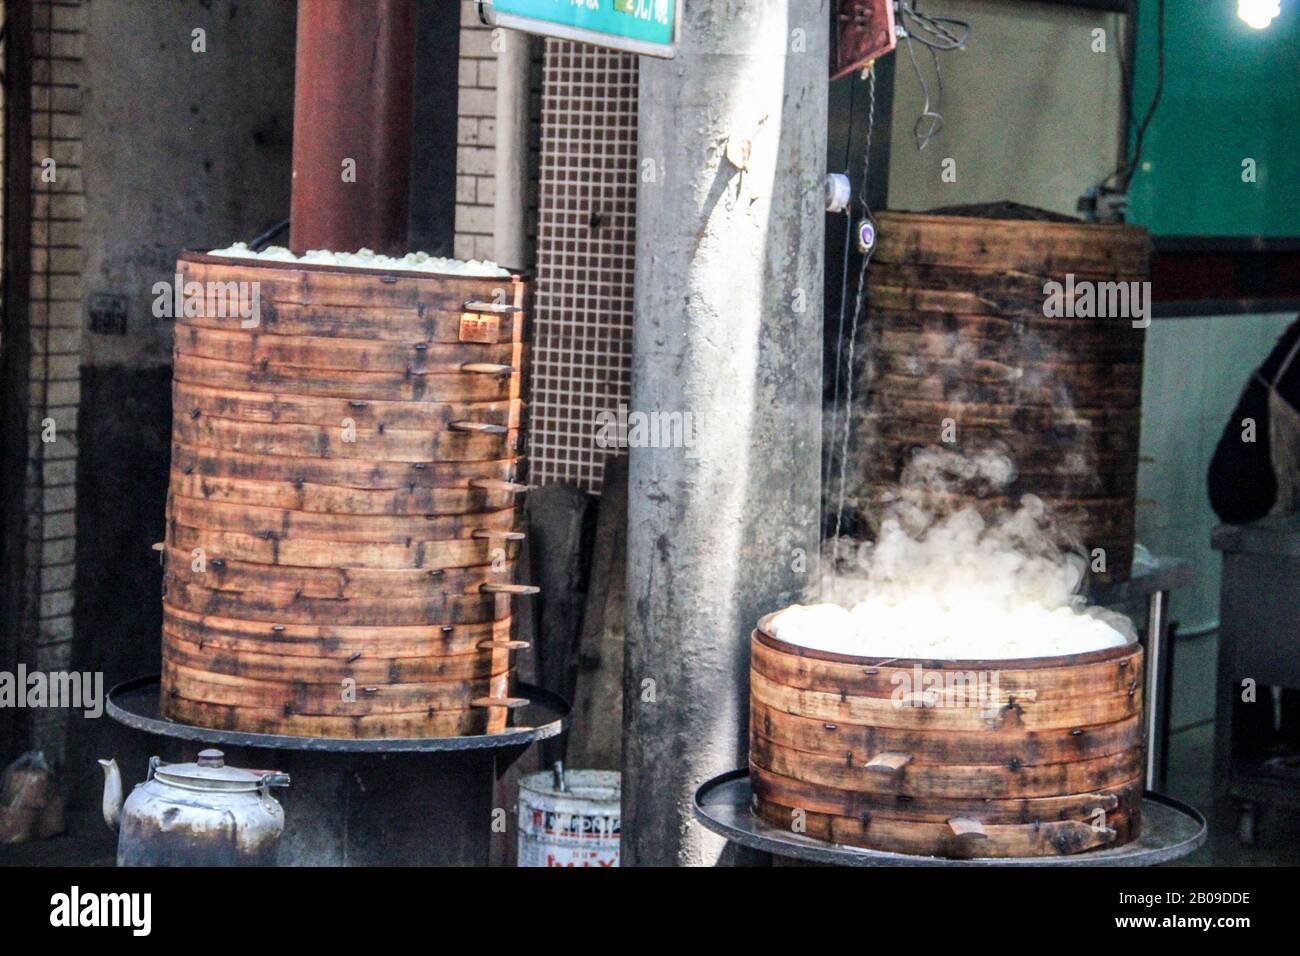 Street food in china. Dumplings cooking inside traditional bamboo steamers, Xian Stock Photo